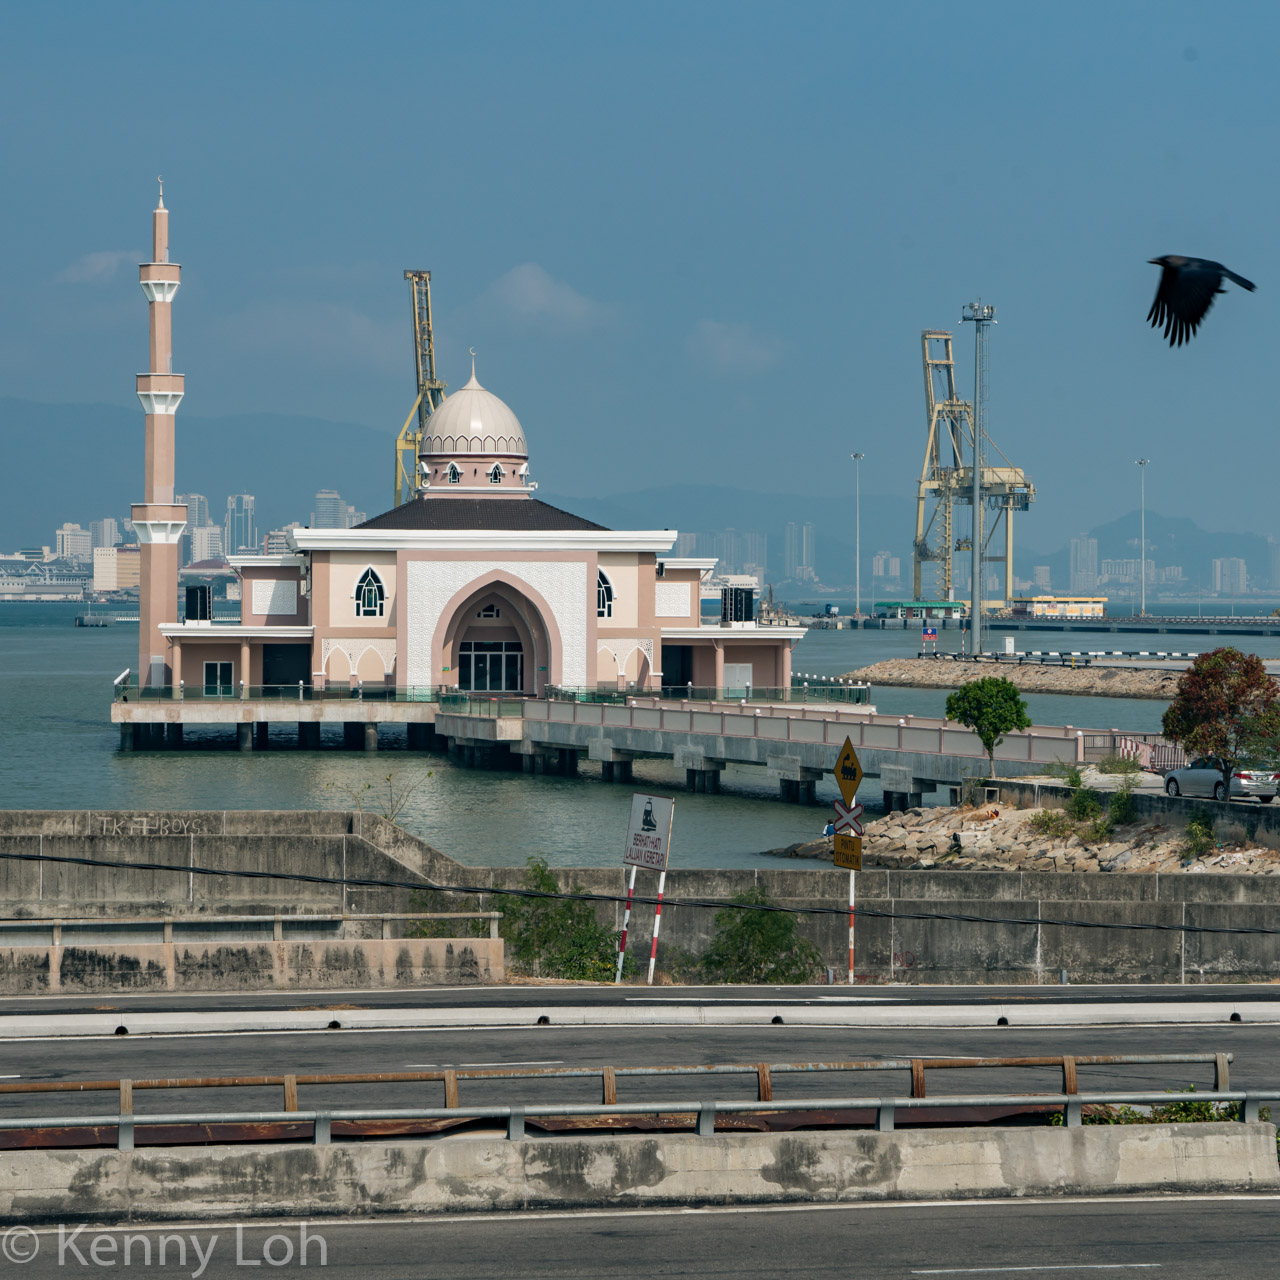 pg13-spu-mosque-on-water-6092